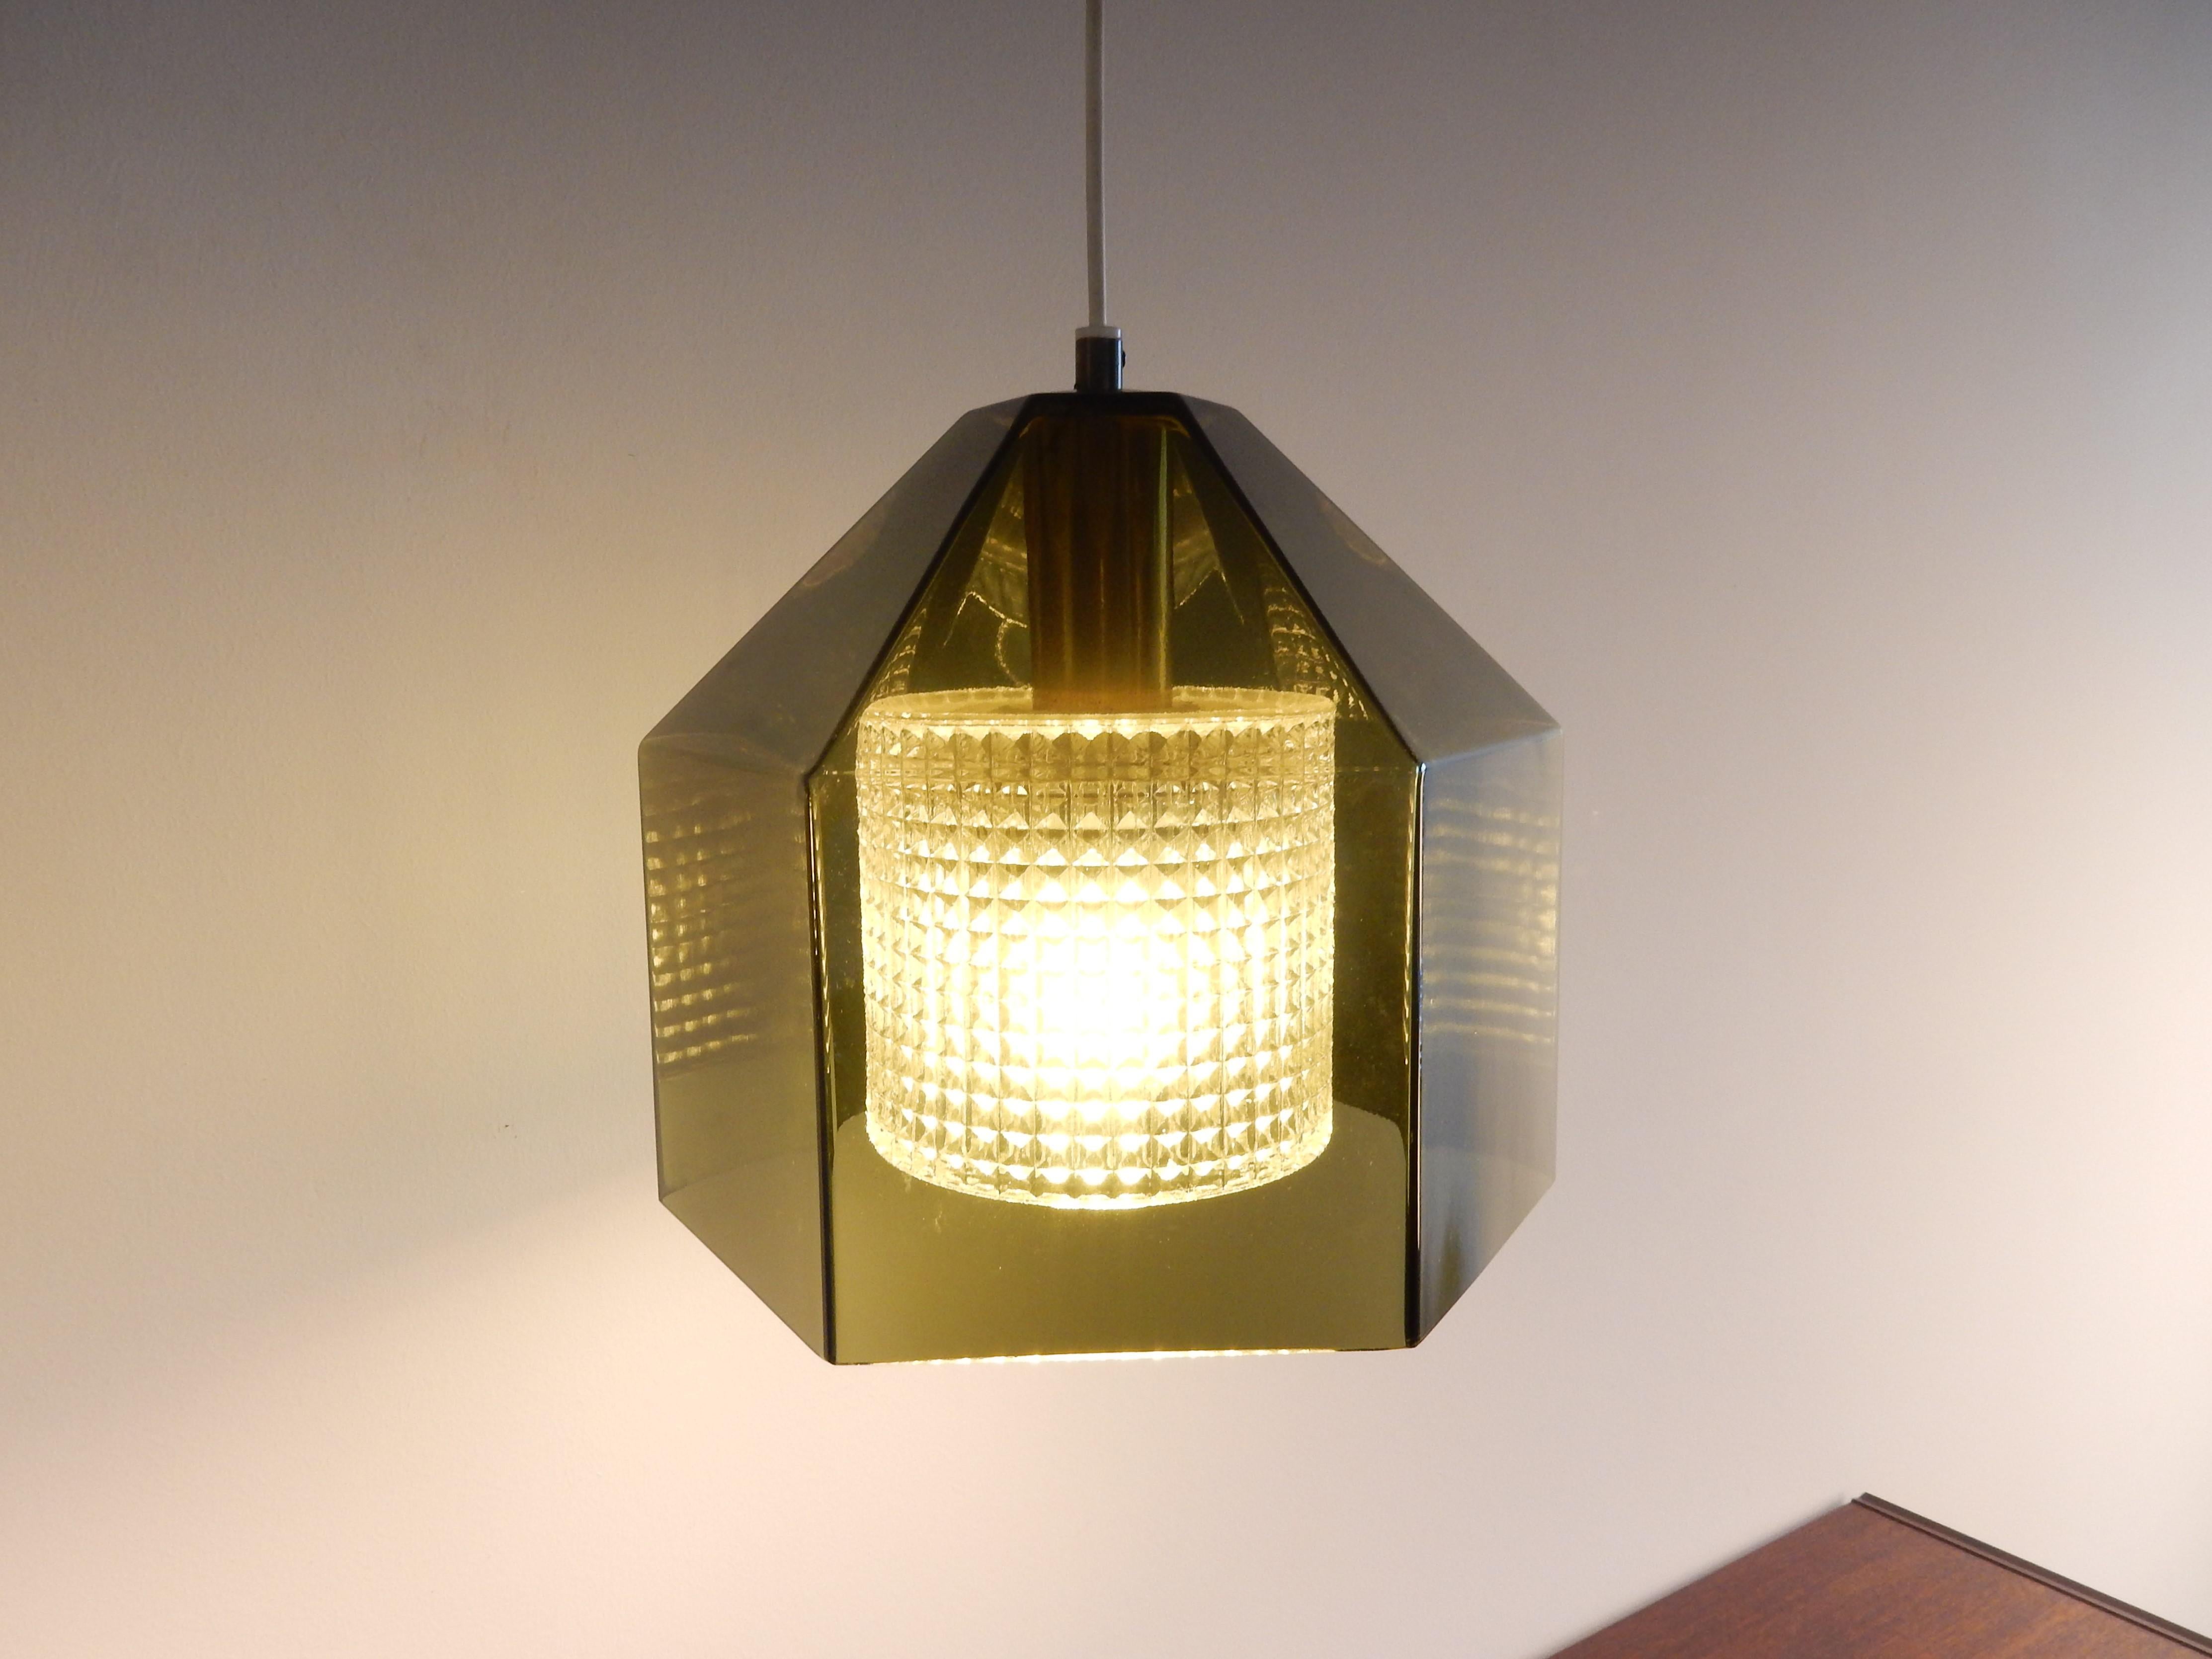 This beautiful and elegant pendant lamp was designed by Carl Fagerlund for Orrefors in Sweden in the 1960s. It has a hexagonal green-grey glass exterior shade and a smaller patterned clear glass interior shade. The lamp gives a good and clear